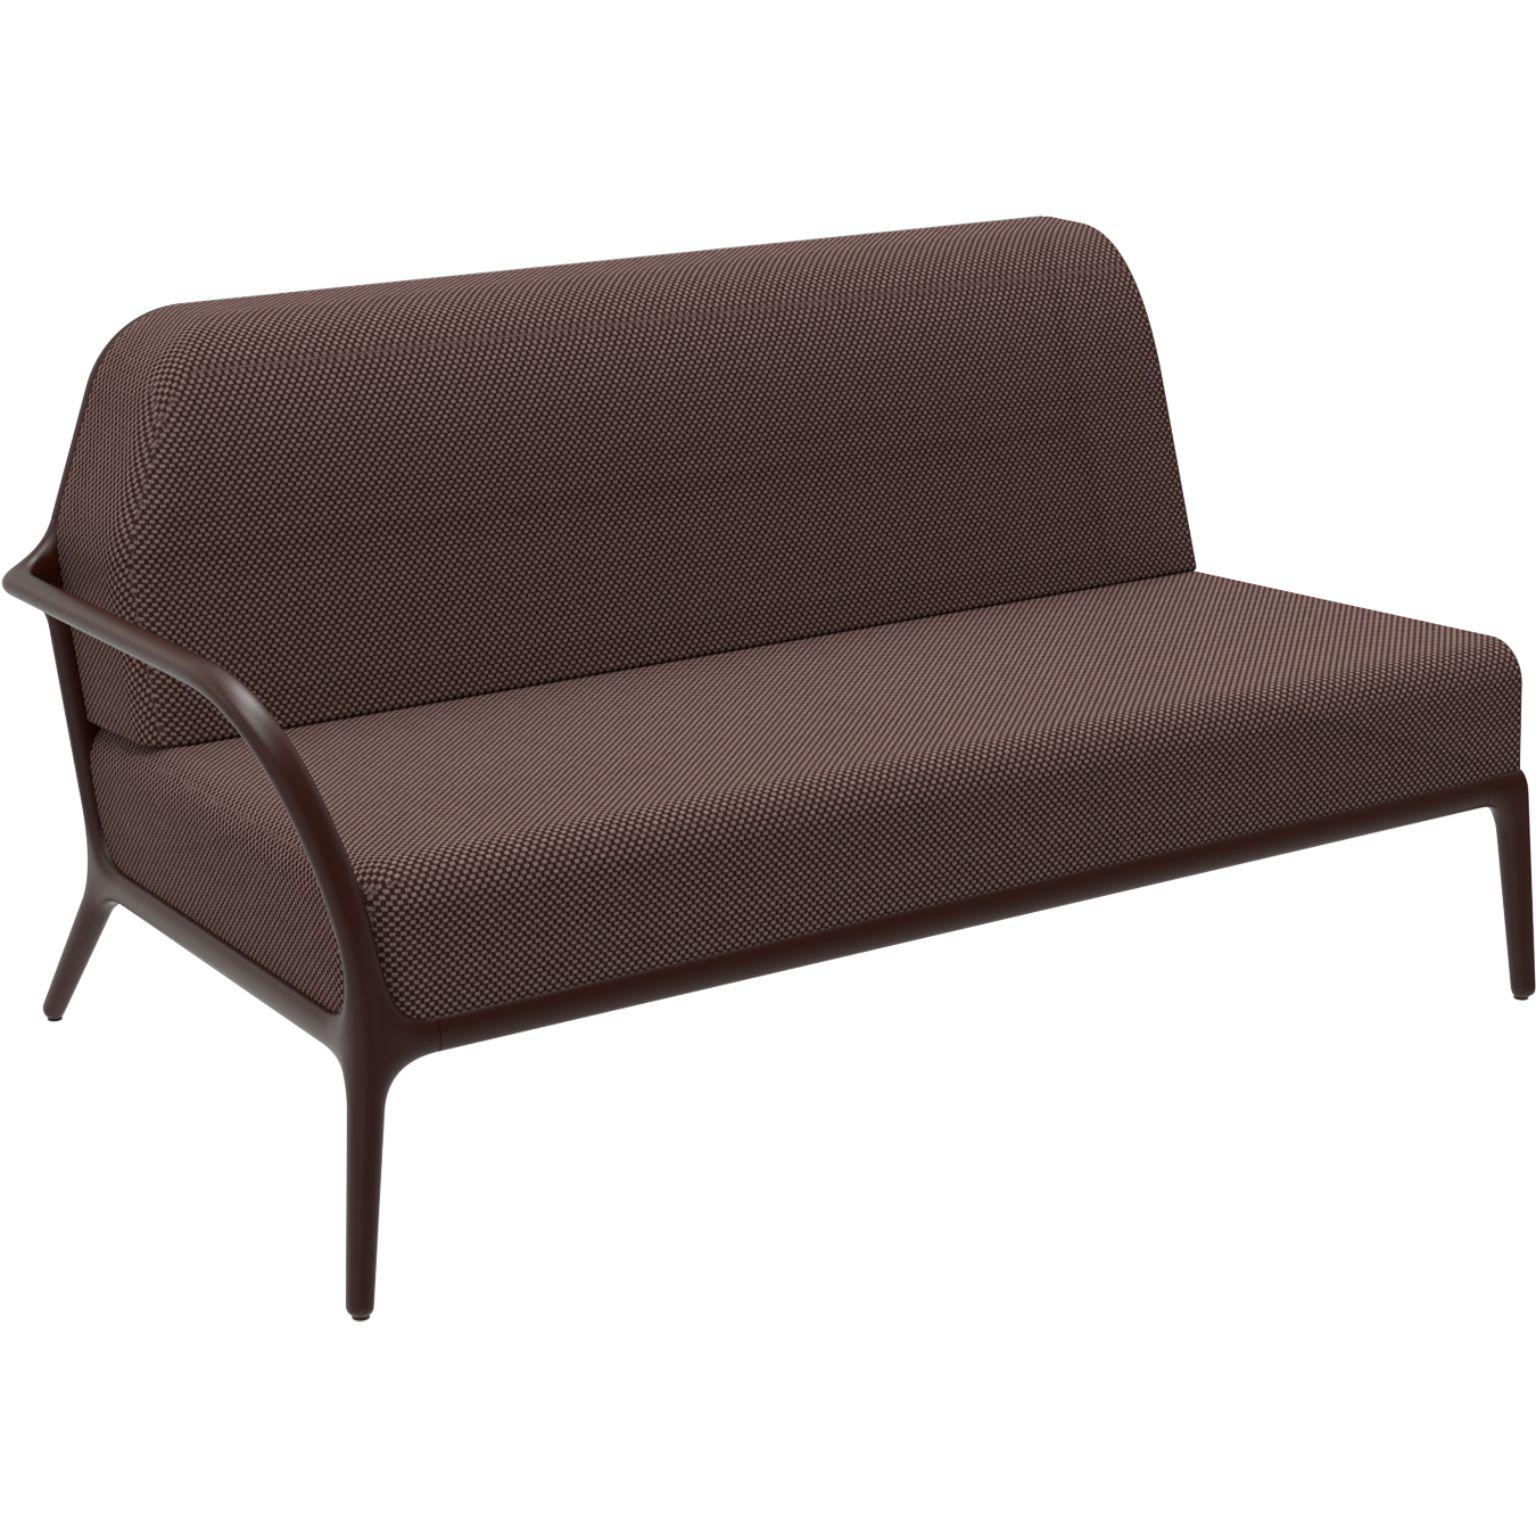 Xaloc right 160 chocolate modular sofa by Mowee
Dimensions: D 100 x W 160 x H 81 cm (Seat Height 42 cm)
Material: Aluminium, Textile
Weight: 37 kg
Also Available in different colours and finishes.

 Xaloc synthesizes the lines of interior